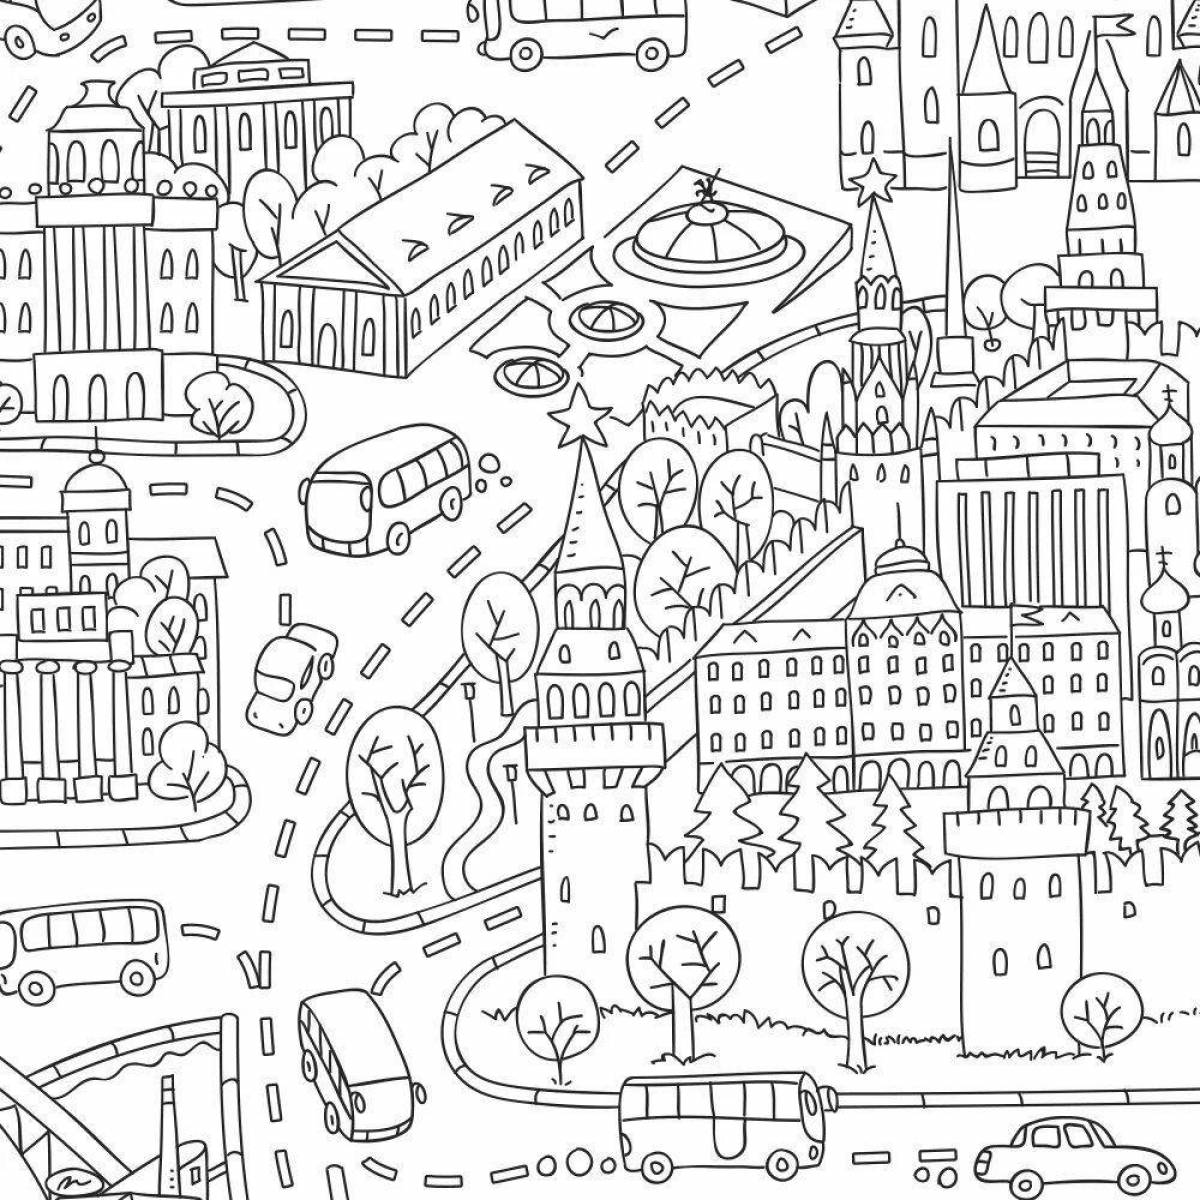 Coloring page amusing map of moscow